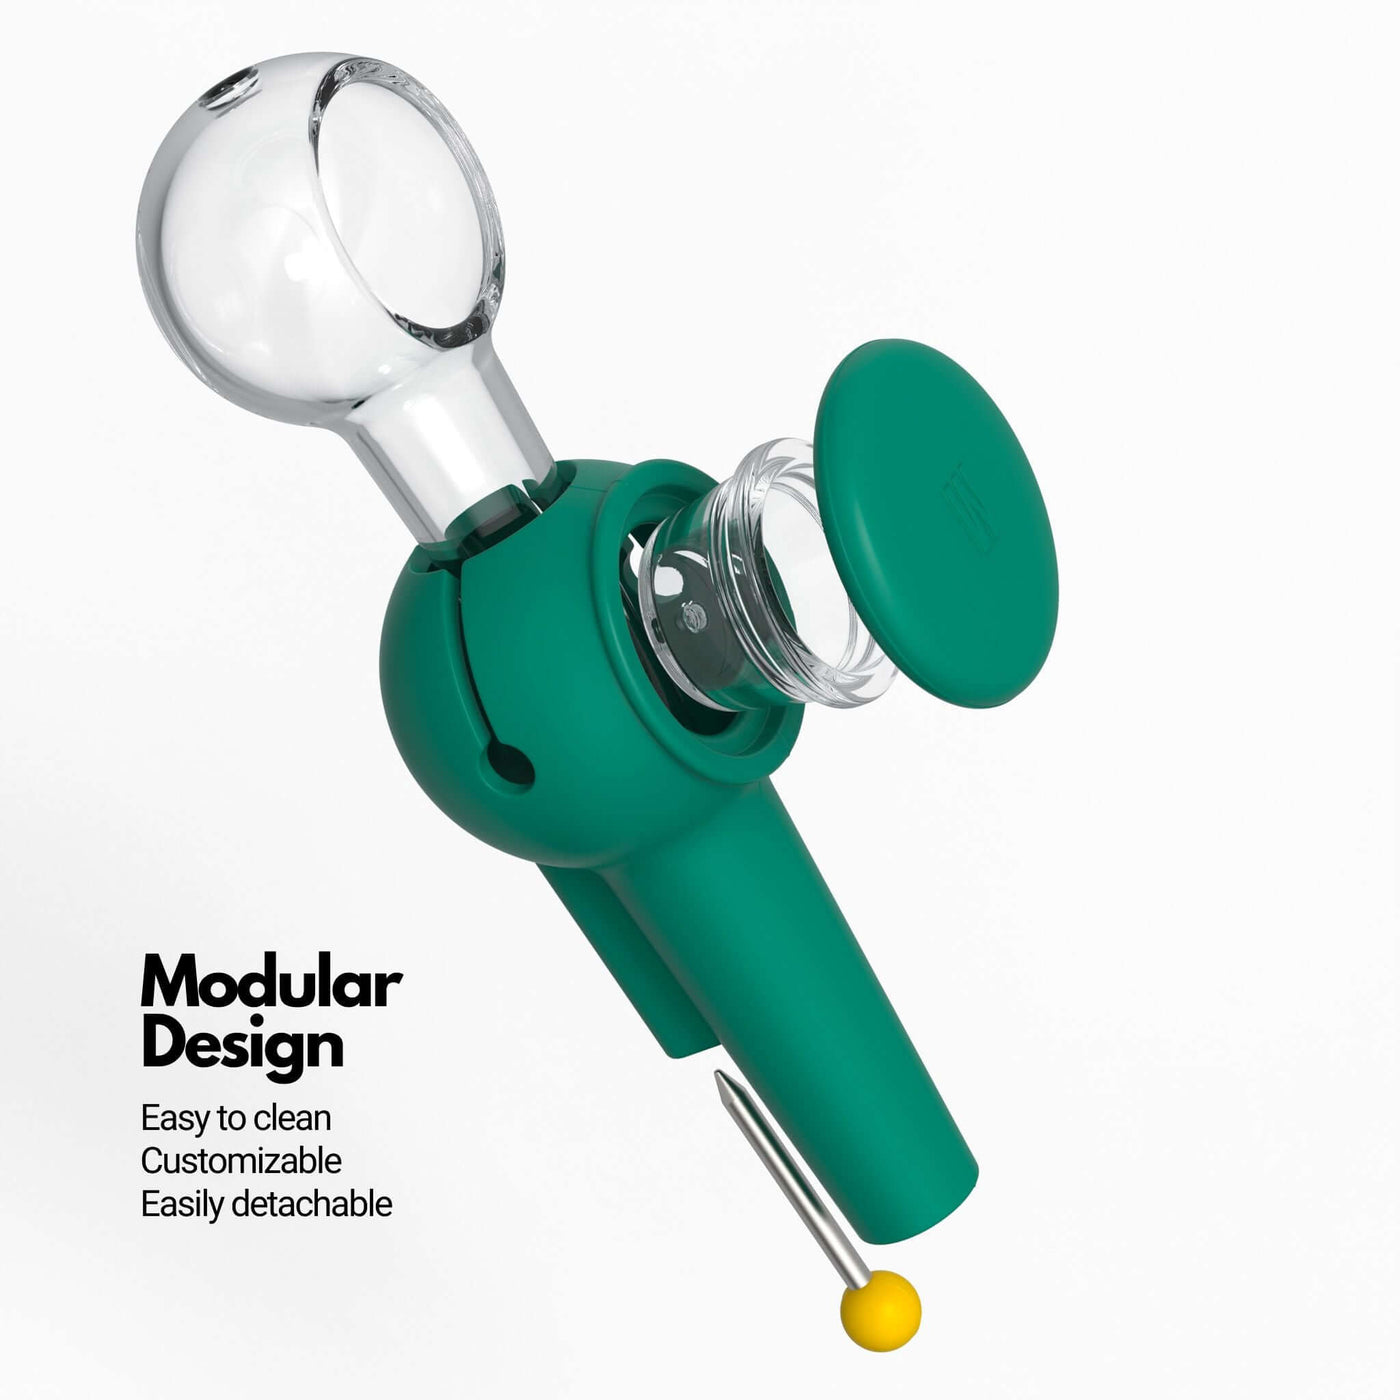 Exploded view infographic of Weeday spoon pipe (in forest green color), highlighting its customizable and detachable features.